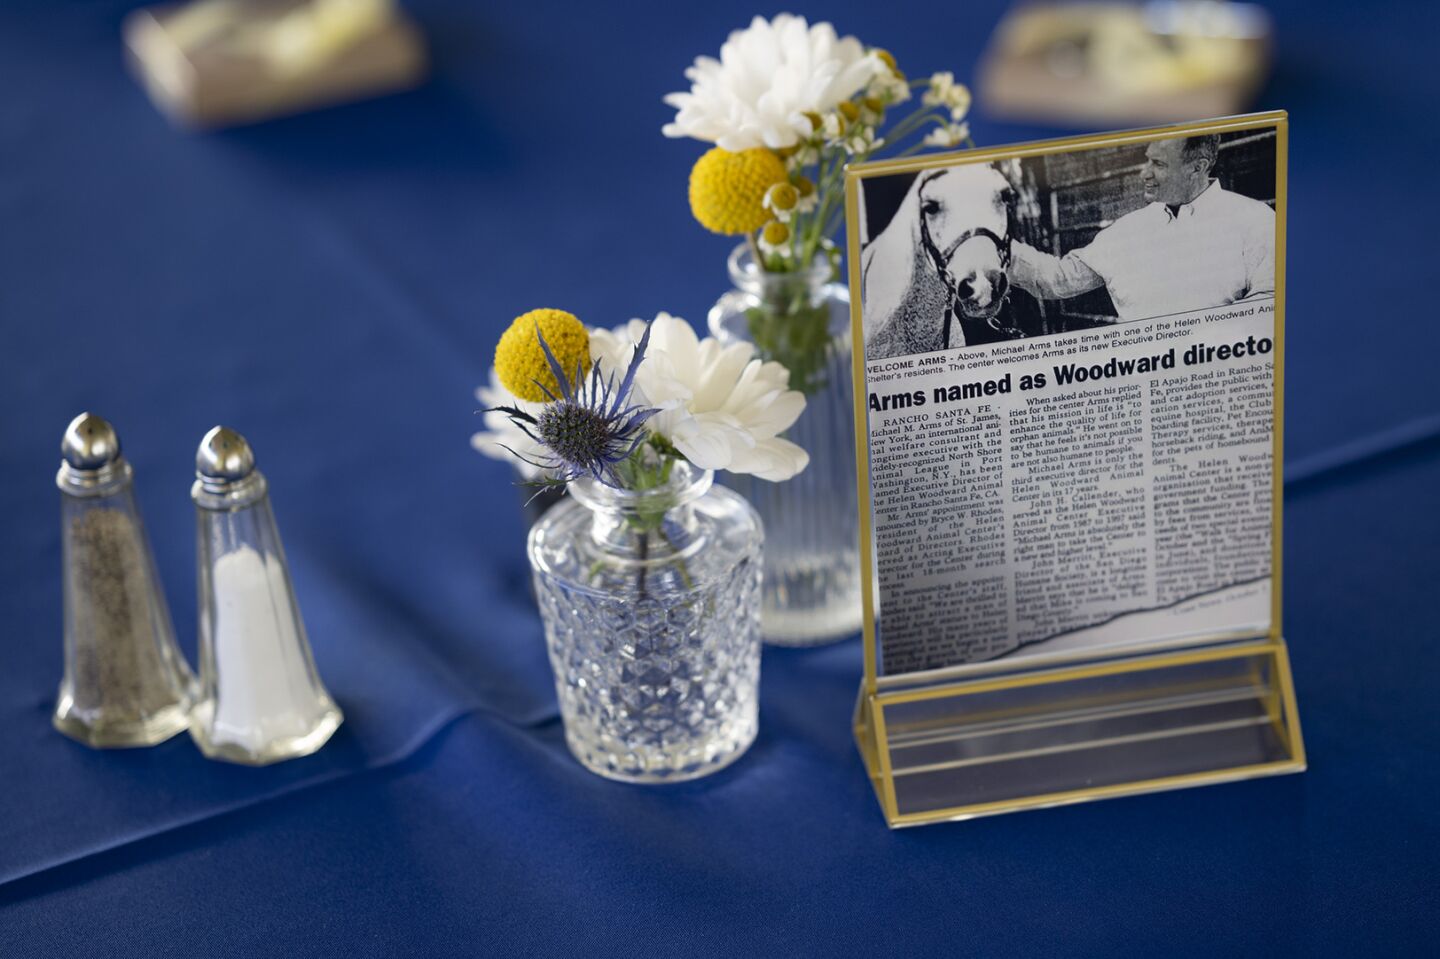 Helen Woodward Animal Center's 50th Anniversary celebration began with a brunch at the center